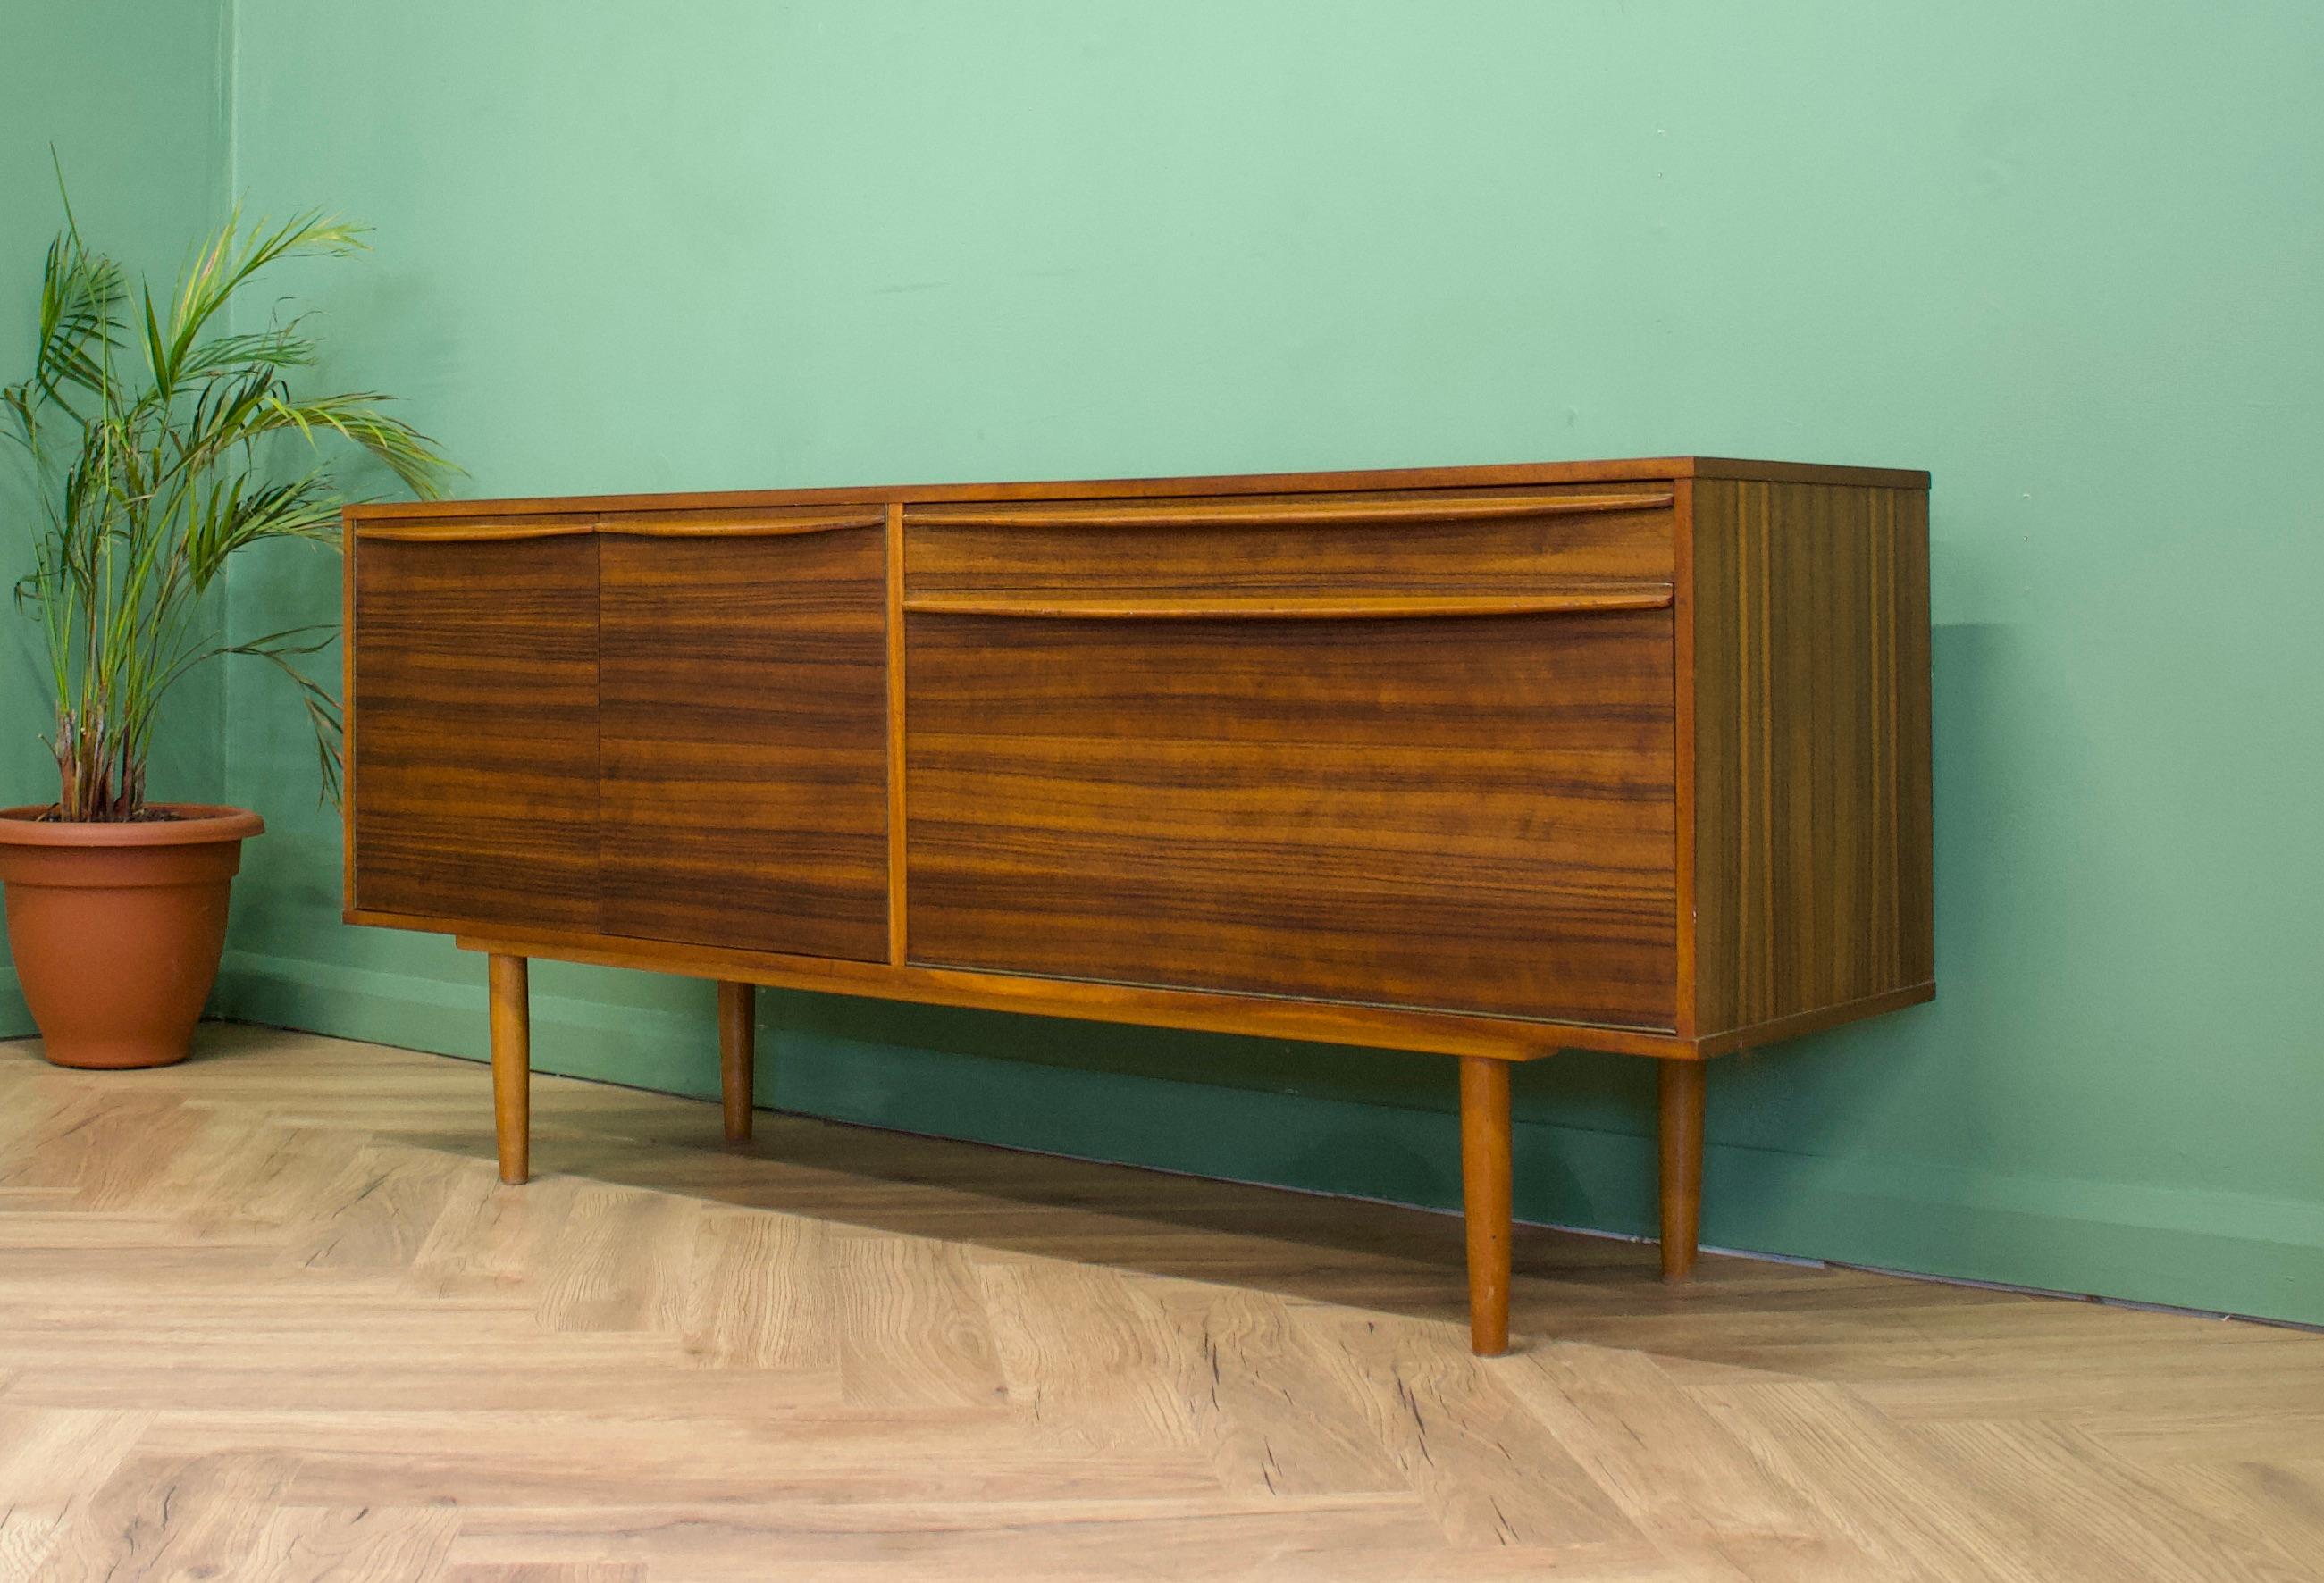 - Mid-Century Modern sideboard - dating from the 1950s.
- Manufactured in the UK by Morris of Glasgow - from the Cumbrae range.
- Featuring a drawer and two cupboards.